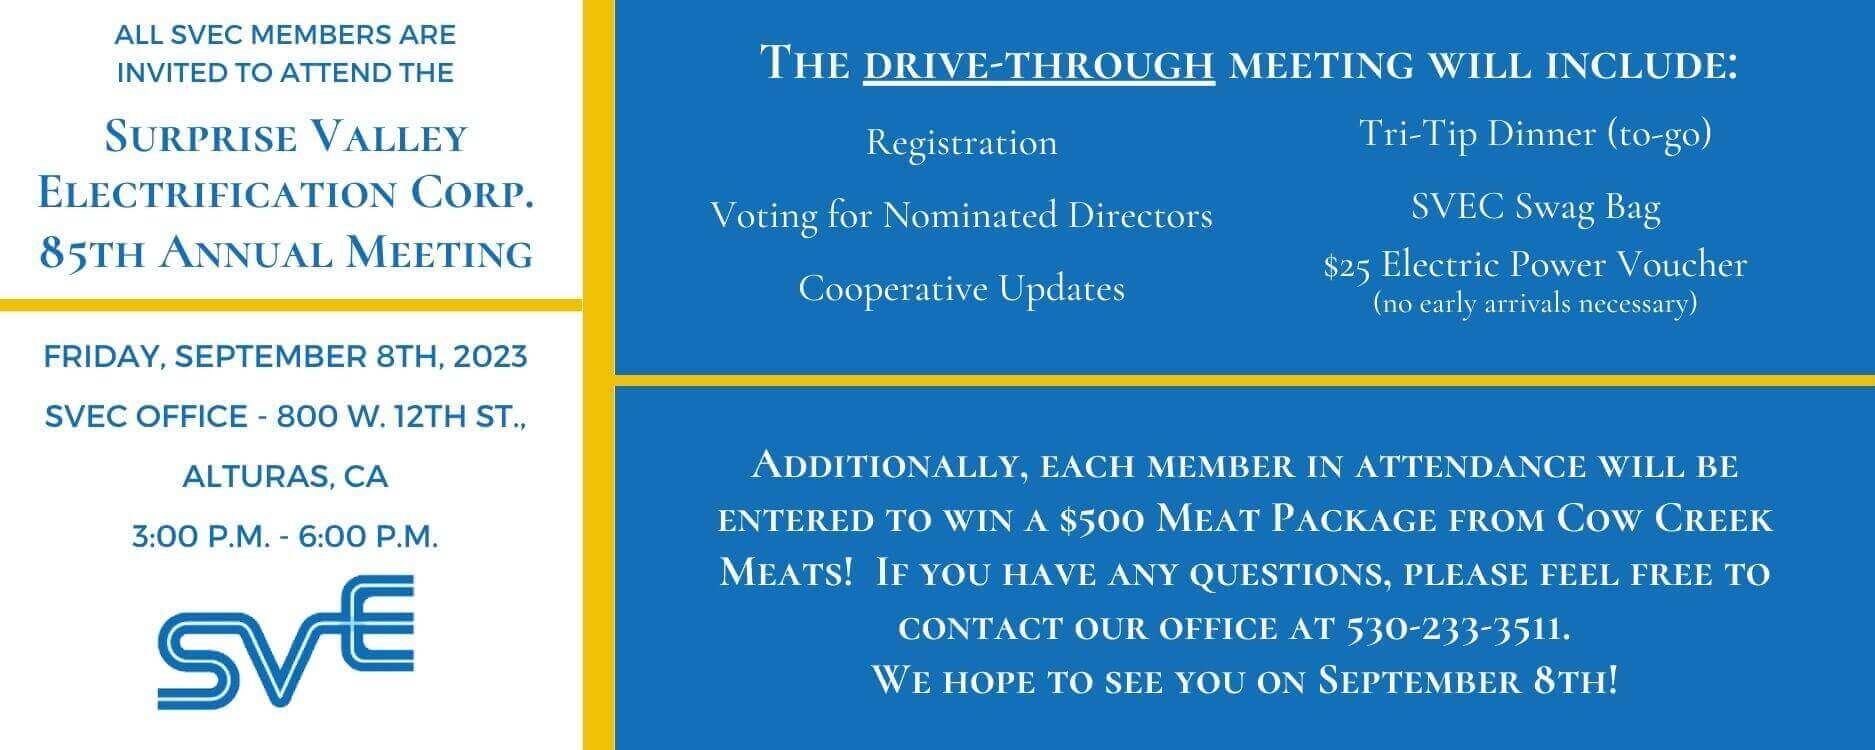 All SVEC Members are invited to attend the Surprise Valley Electrification Corp. 85th Annual Meeting.  The drive-through meeting will be held on Friday, September 8th, 2023, from 3:00 p.m. to 6:00 p.m., at the SVEC Office (800 W. 12th Street; Alturas, CA 96101).  Members attending the meeting will register, vote for nominated Directors, receive updates from the cooperative, pick up an SVEC Swag Bag (including a $25 Power Voucher), and receive a tri-tip dinner to-go.  Additionally, each member in attendance will be entered to win a grand prize!  If you have any questions, please feel free to contact our office at 530-233-3511.  We hope to see you on September 8th!